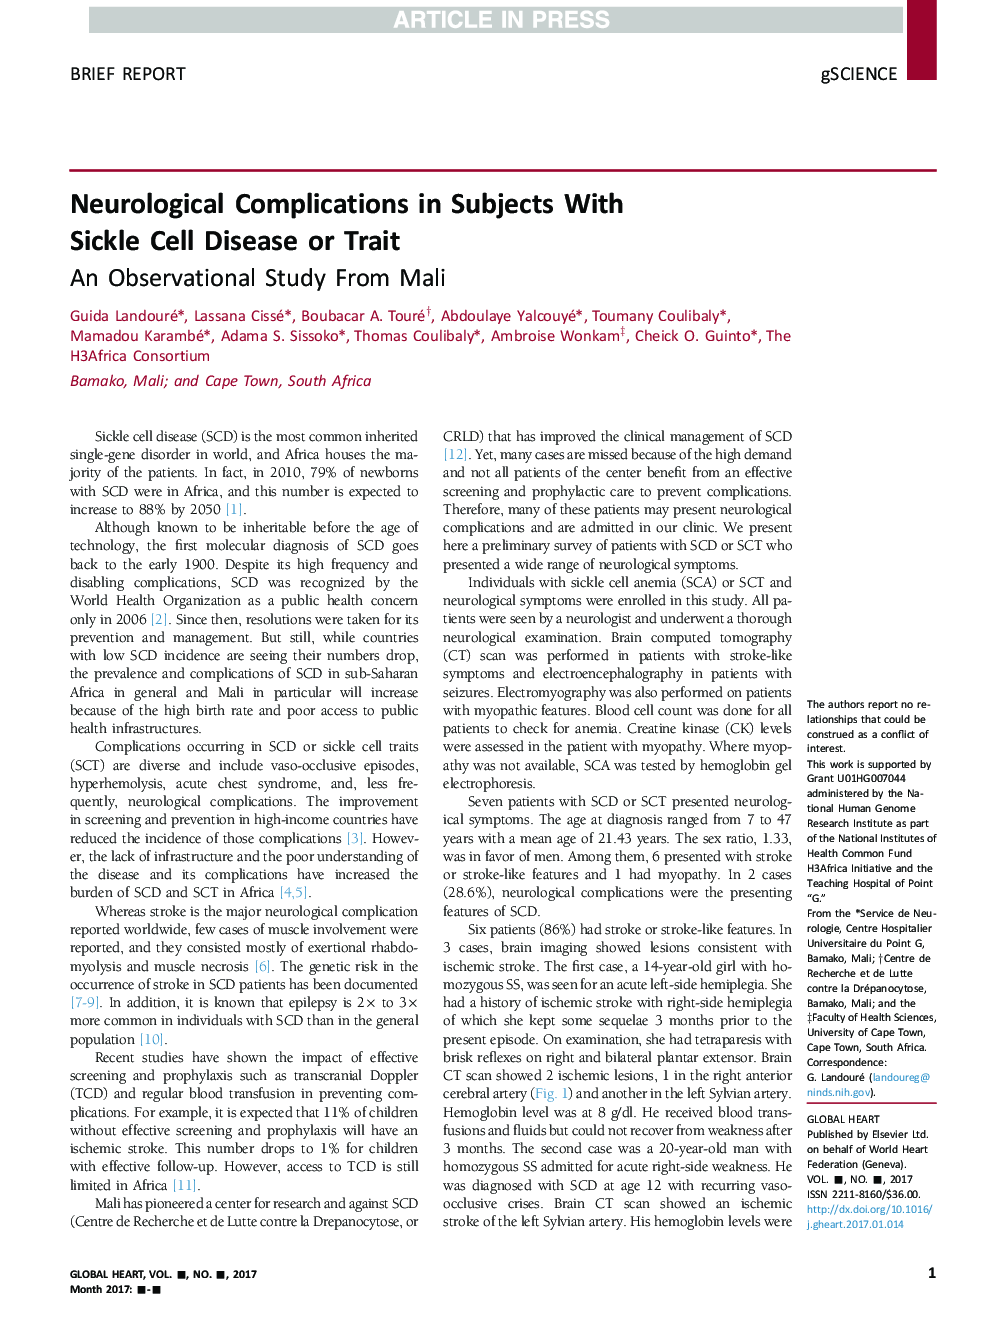 Neurological Complications in Subjects With Sickle Cell Disease or Trait